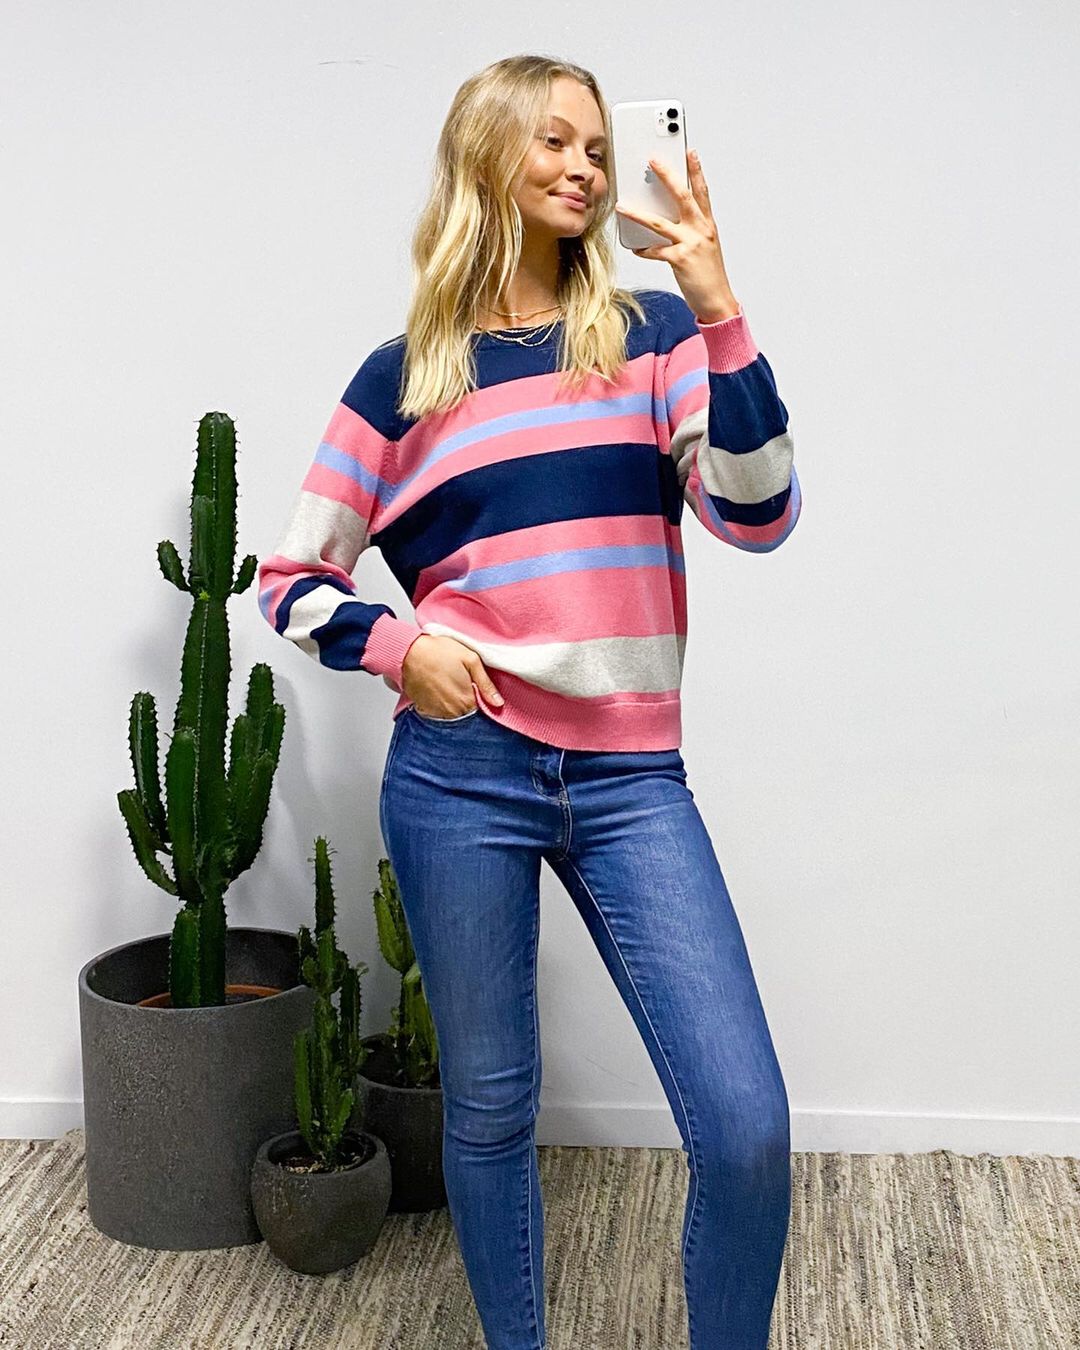 Cherie Knit - Navy Pink Colourblock: This super cute light knit is perfect for those in between days where you're not sure if you are hot or cold!
Features:

Short length
Fitted sleeves with ribbed cuff - Ciao Bella Dresses 